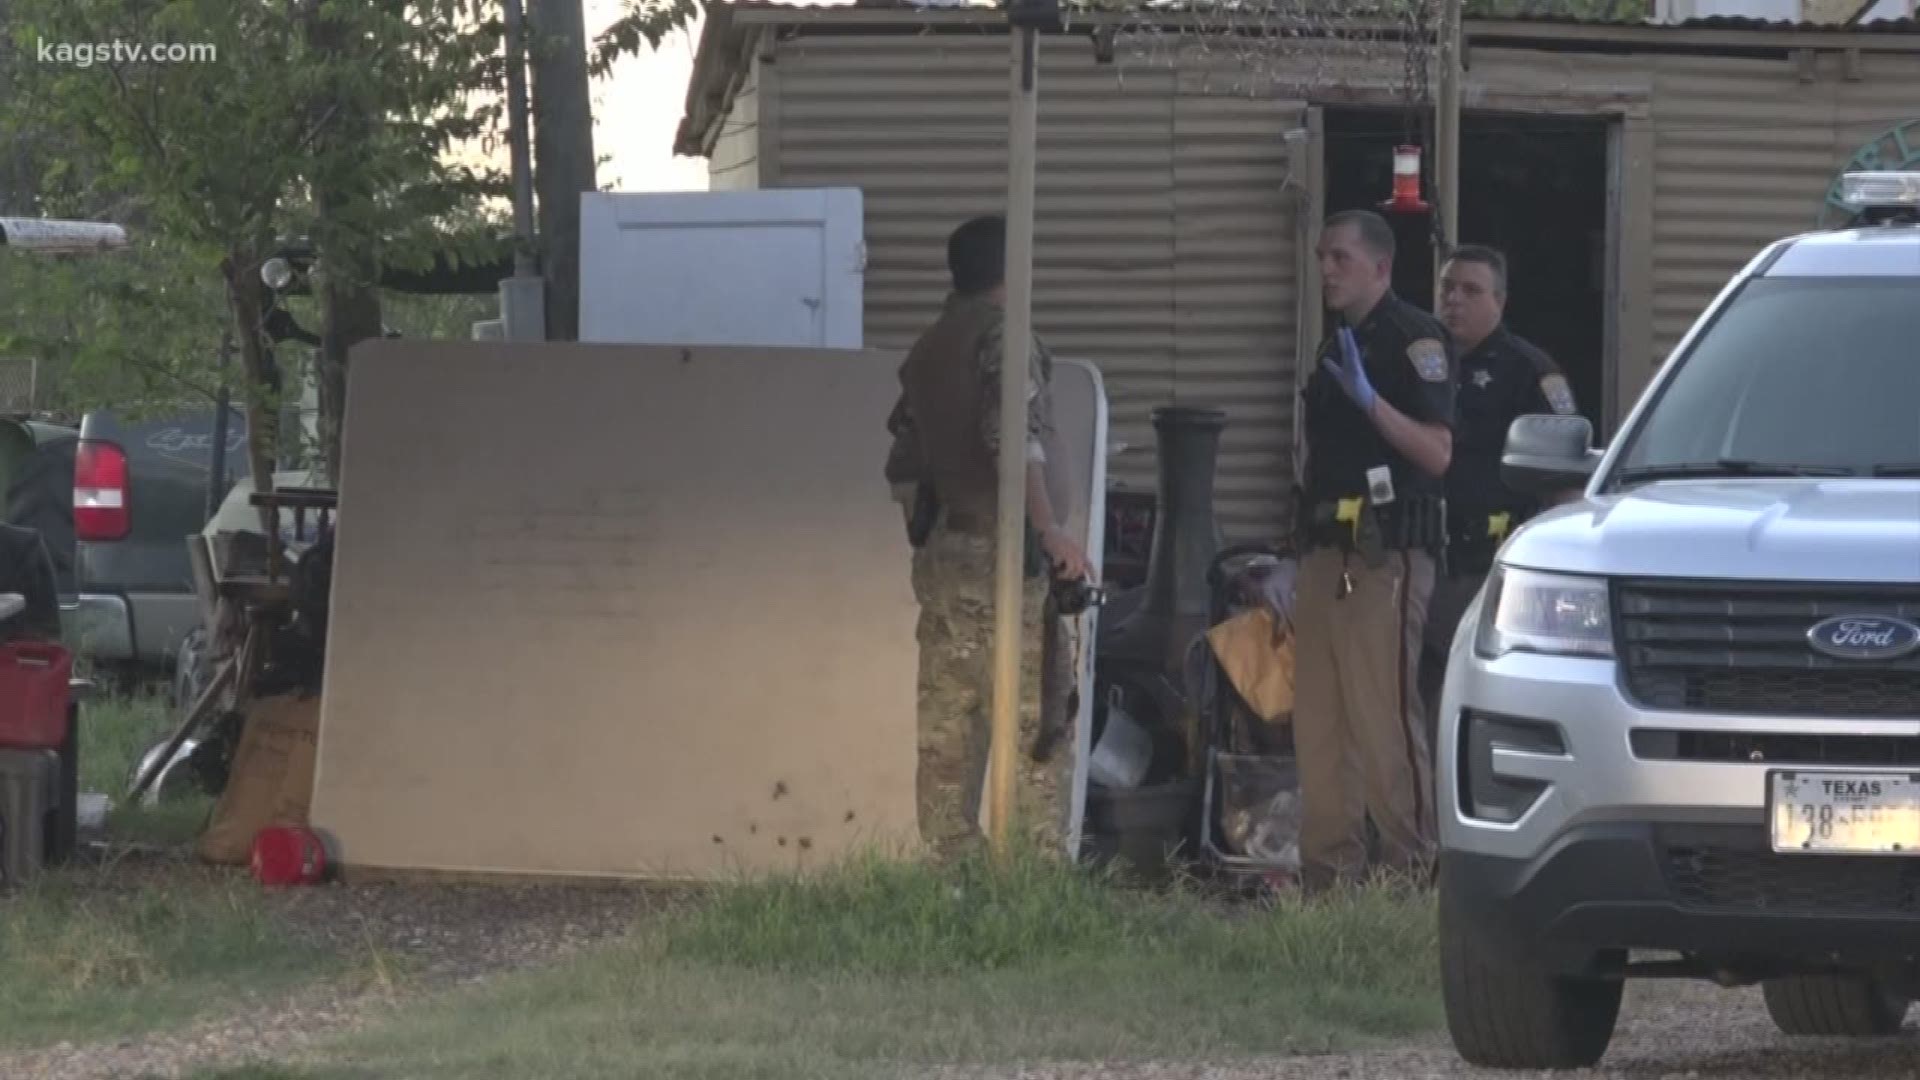 The armed man refused to come out of his house, but the standoff ended peacefully.